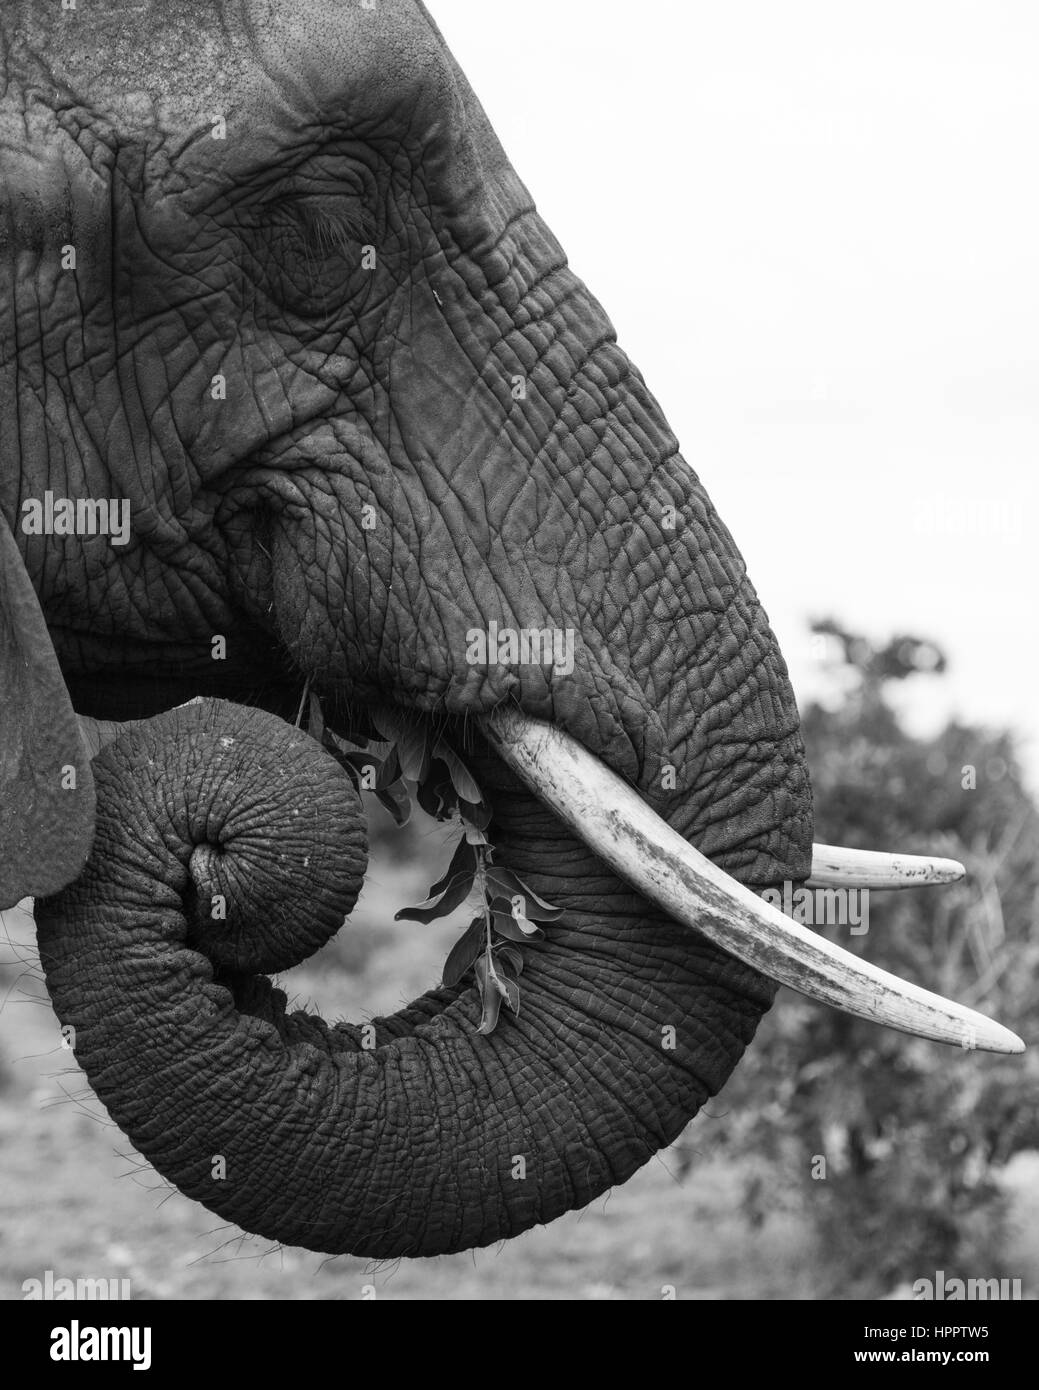 An African Elephant eating leaves Stock Photo